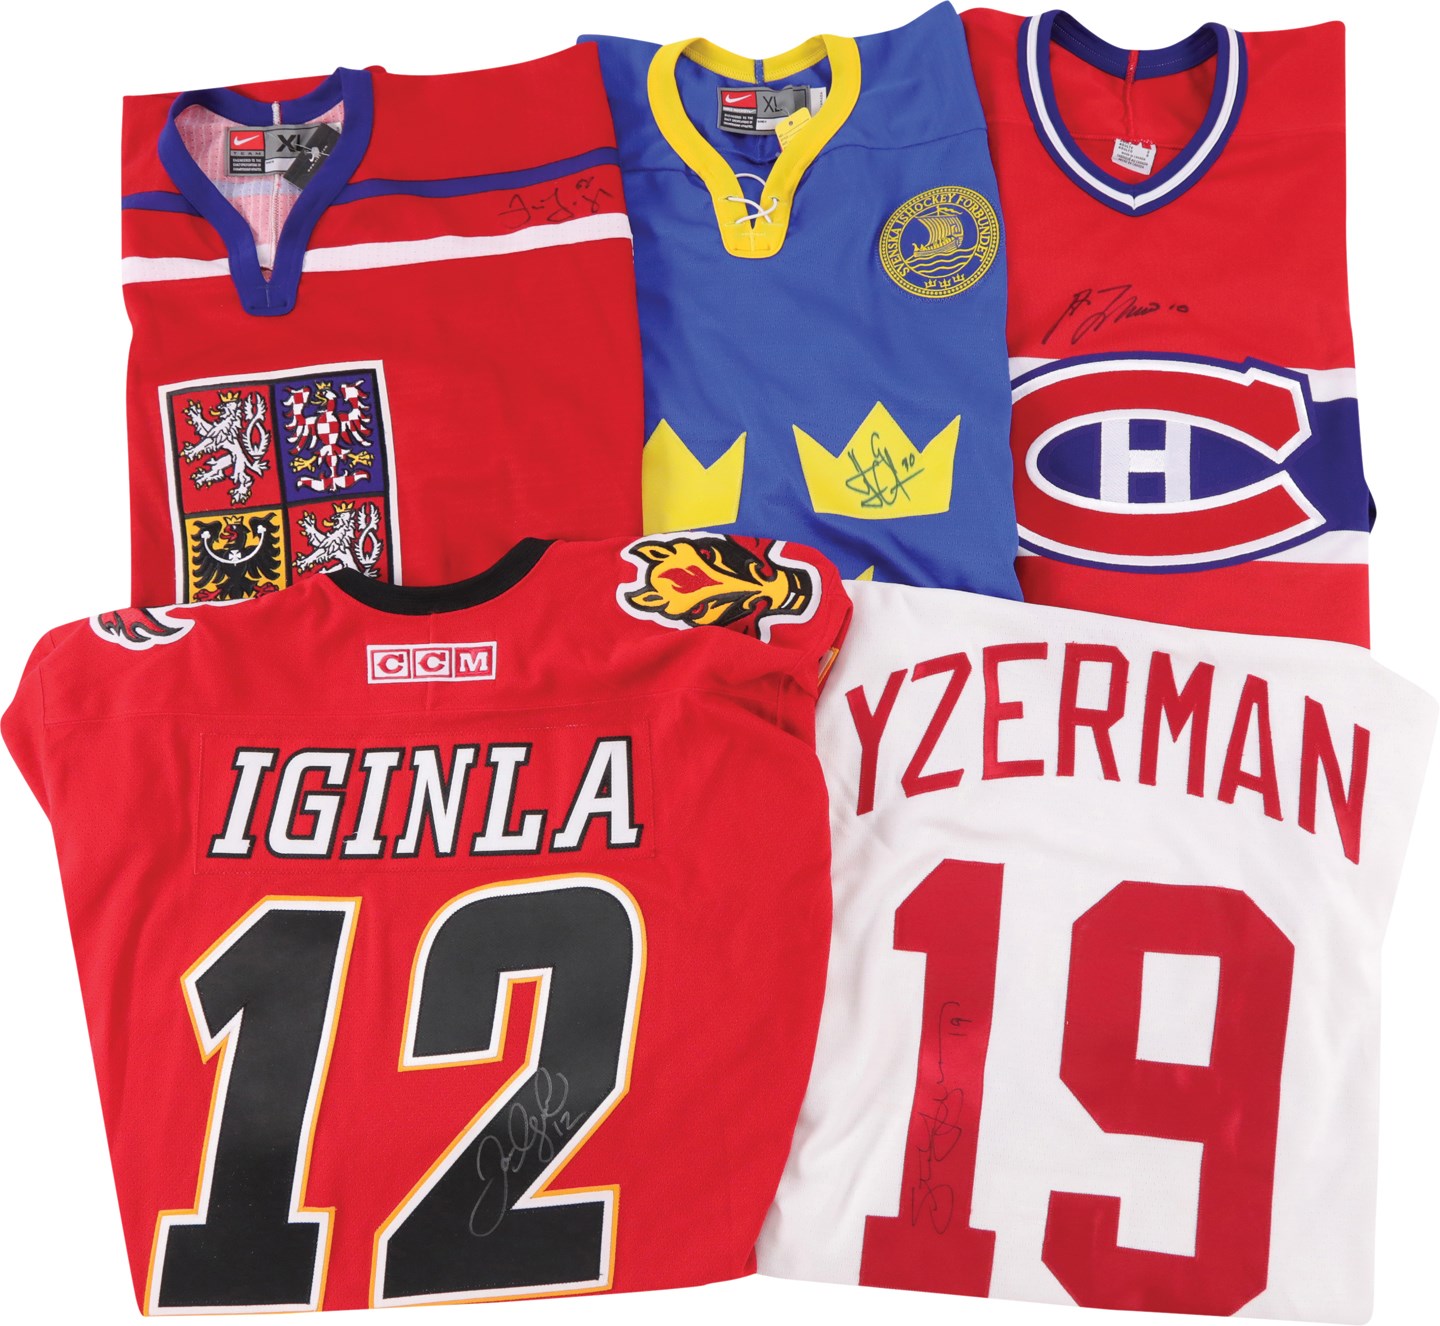 Hockey - NHL Hall of Famers & Stars Signed Jersey Collection (14)